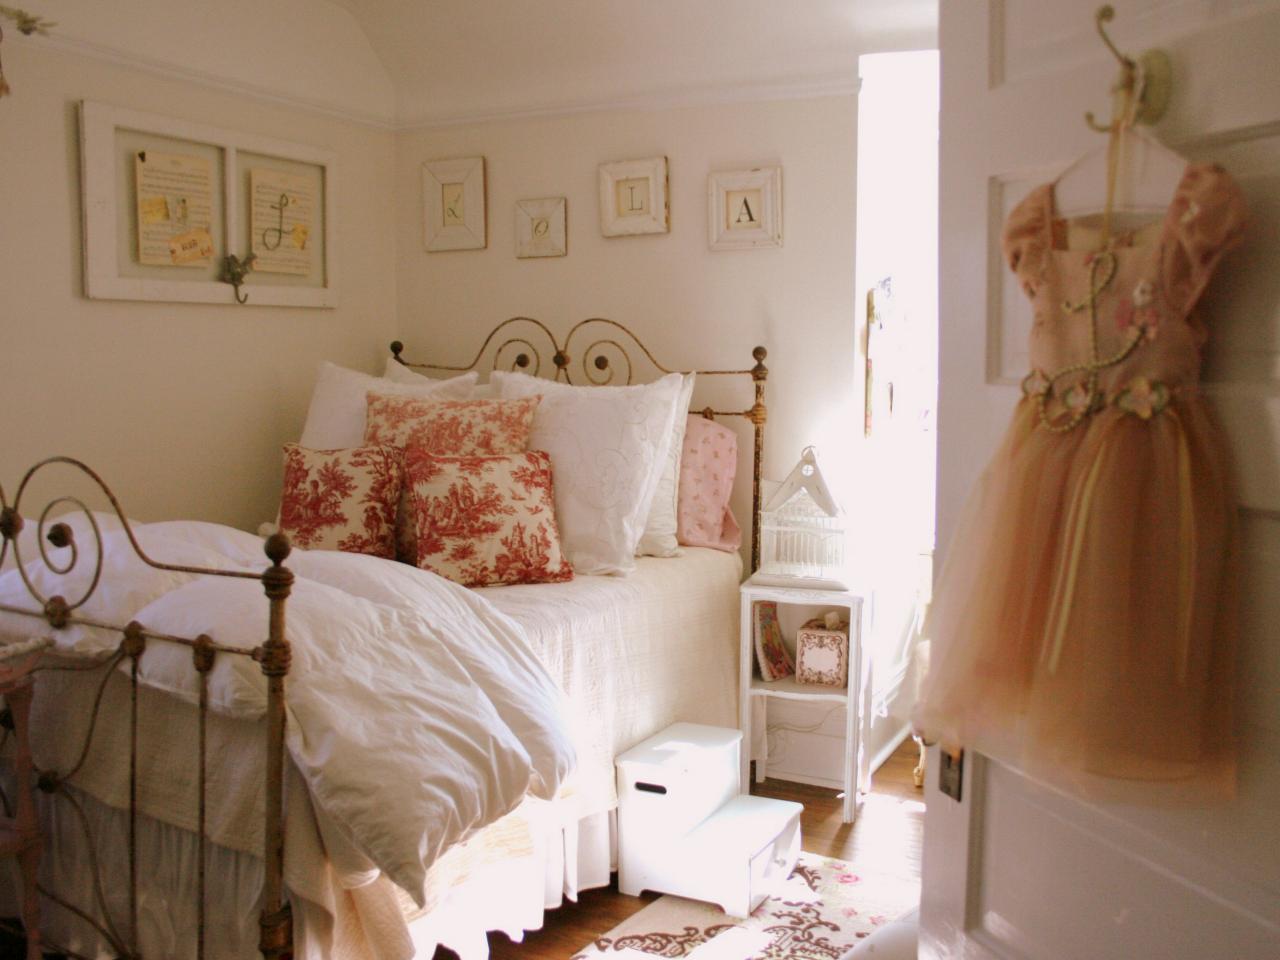 Rooms on a Budget: Our 10 Favorites From HGTV Fans | Kids Room Ideas ...